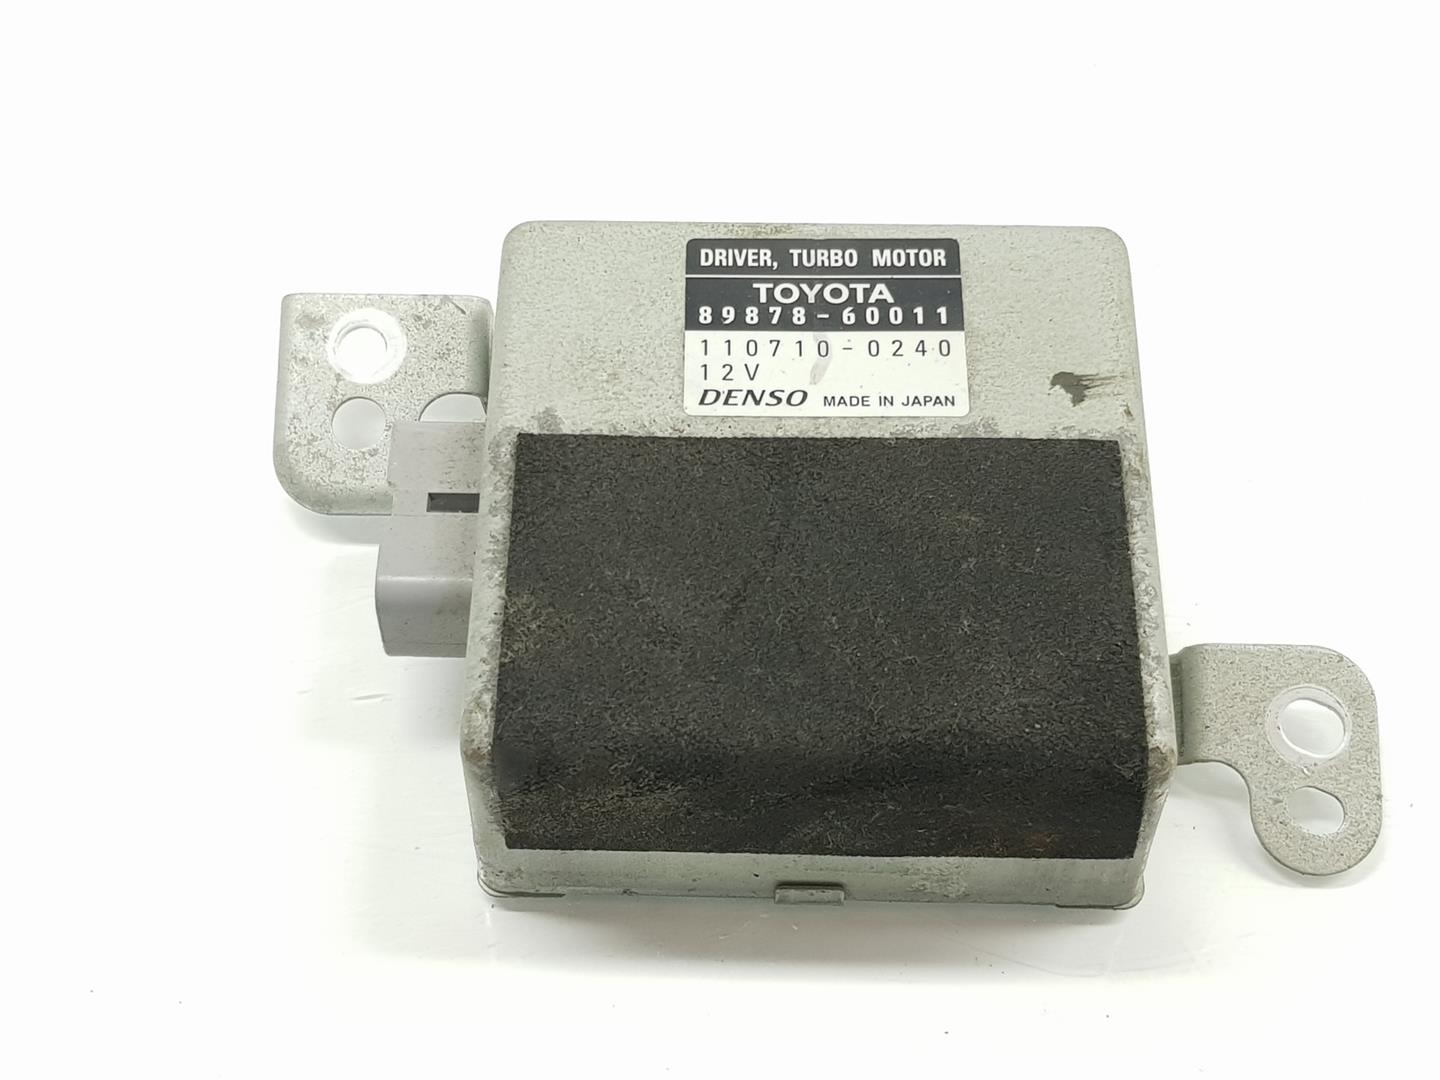 TOYOTA Land Cruiser 70 Series (1984-2024) Other Control Units 1107100240, 8987860011 23753831